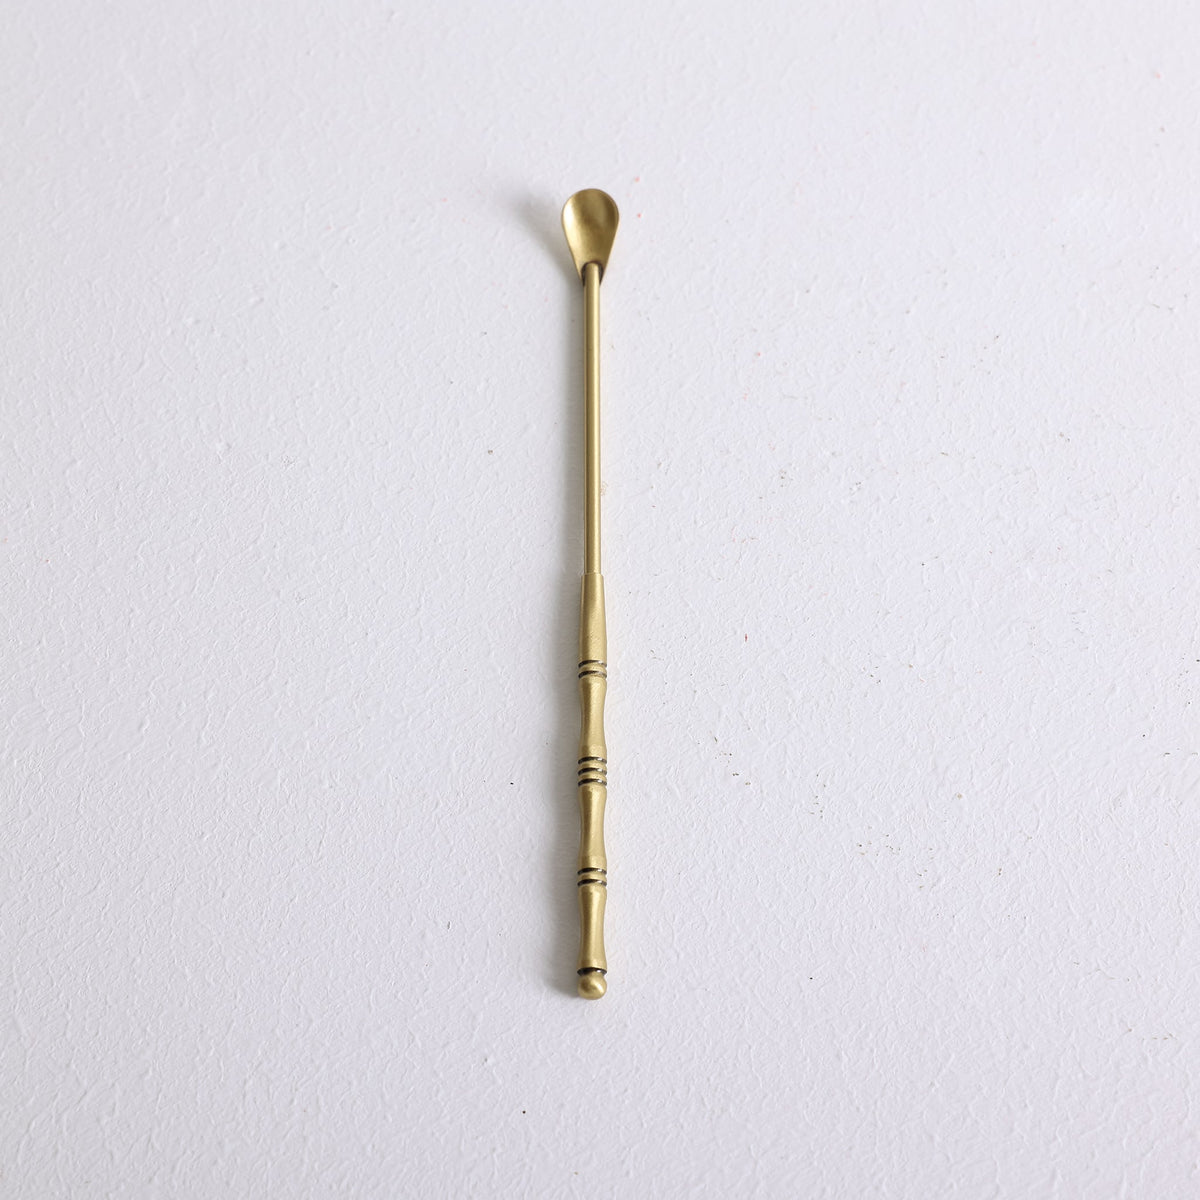 A small bronze spoon for scooping loose incense powder